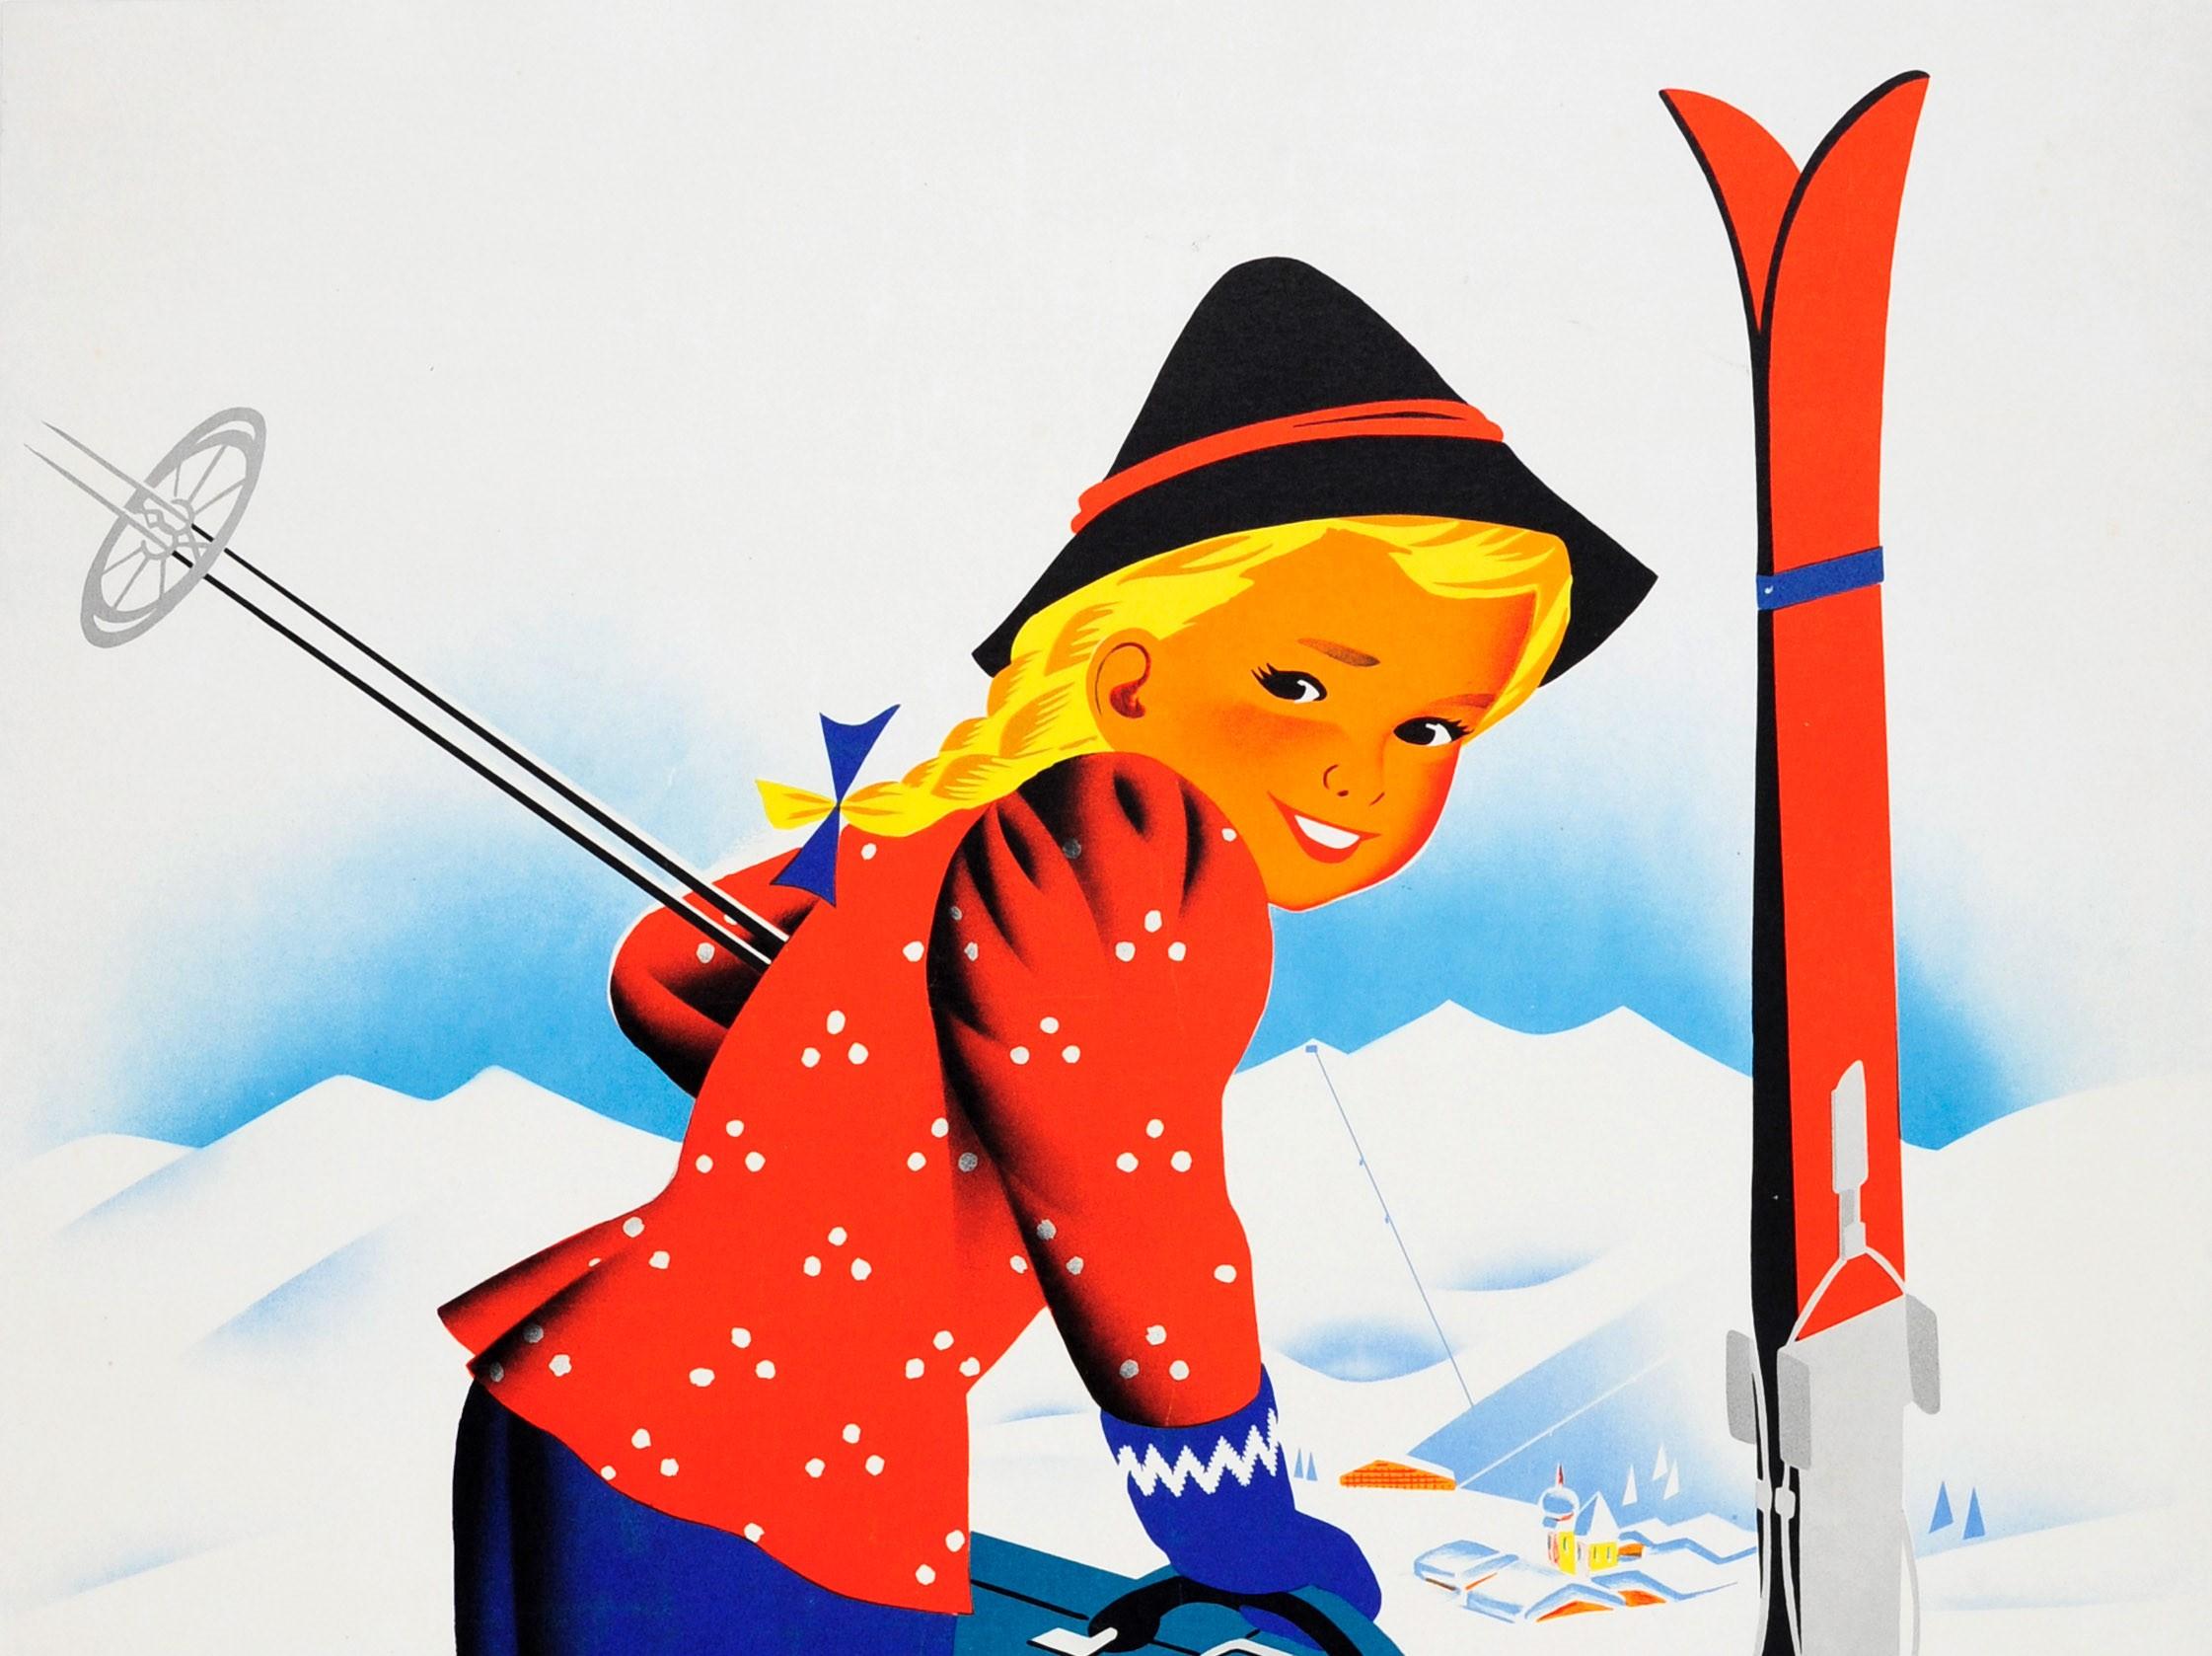 Original vintage ski poster promoting winter sports in Austria. Great artwork featuring a traditionally dressed young girl in front of her suitcase covered with stickers of major Austrian ski resorts with snowy mountains in the background.